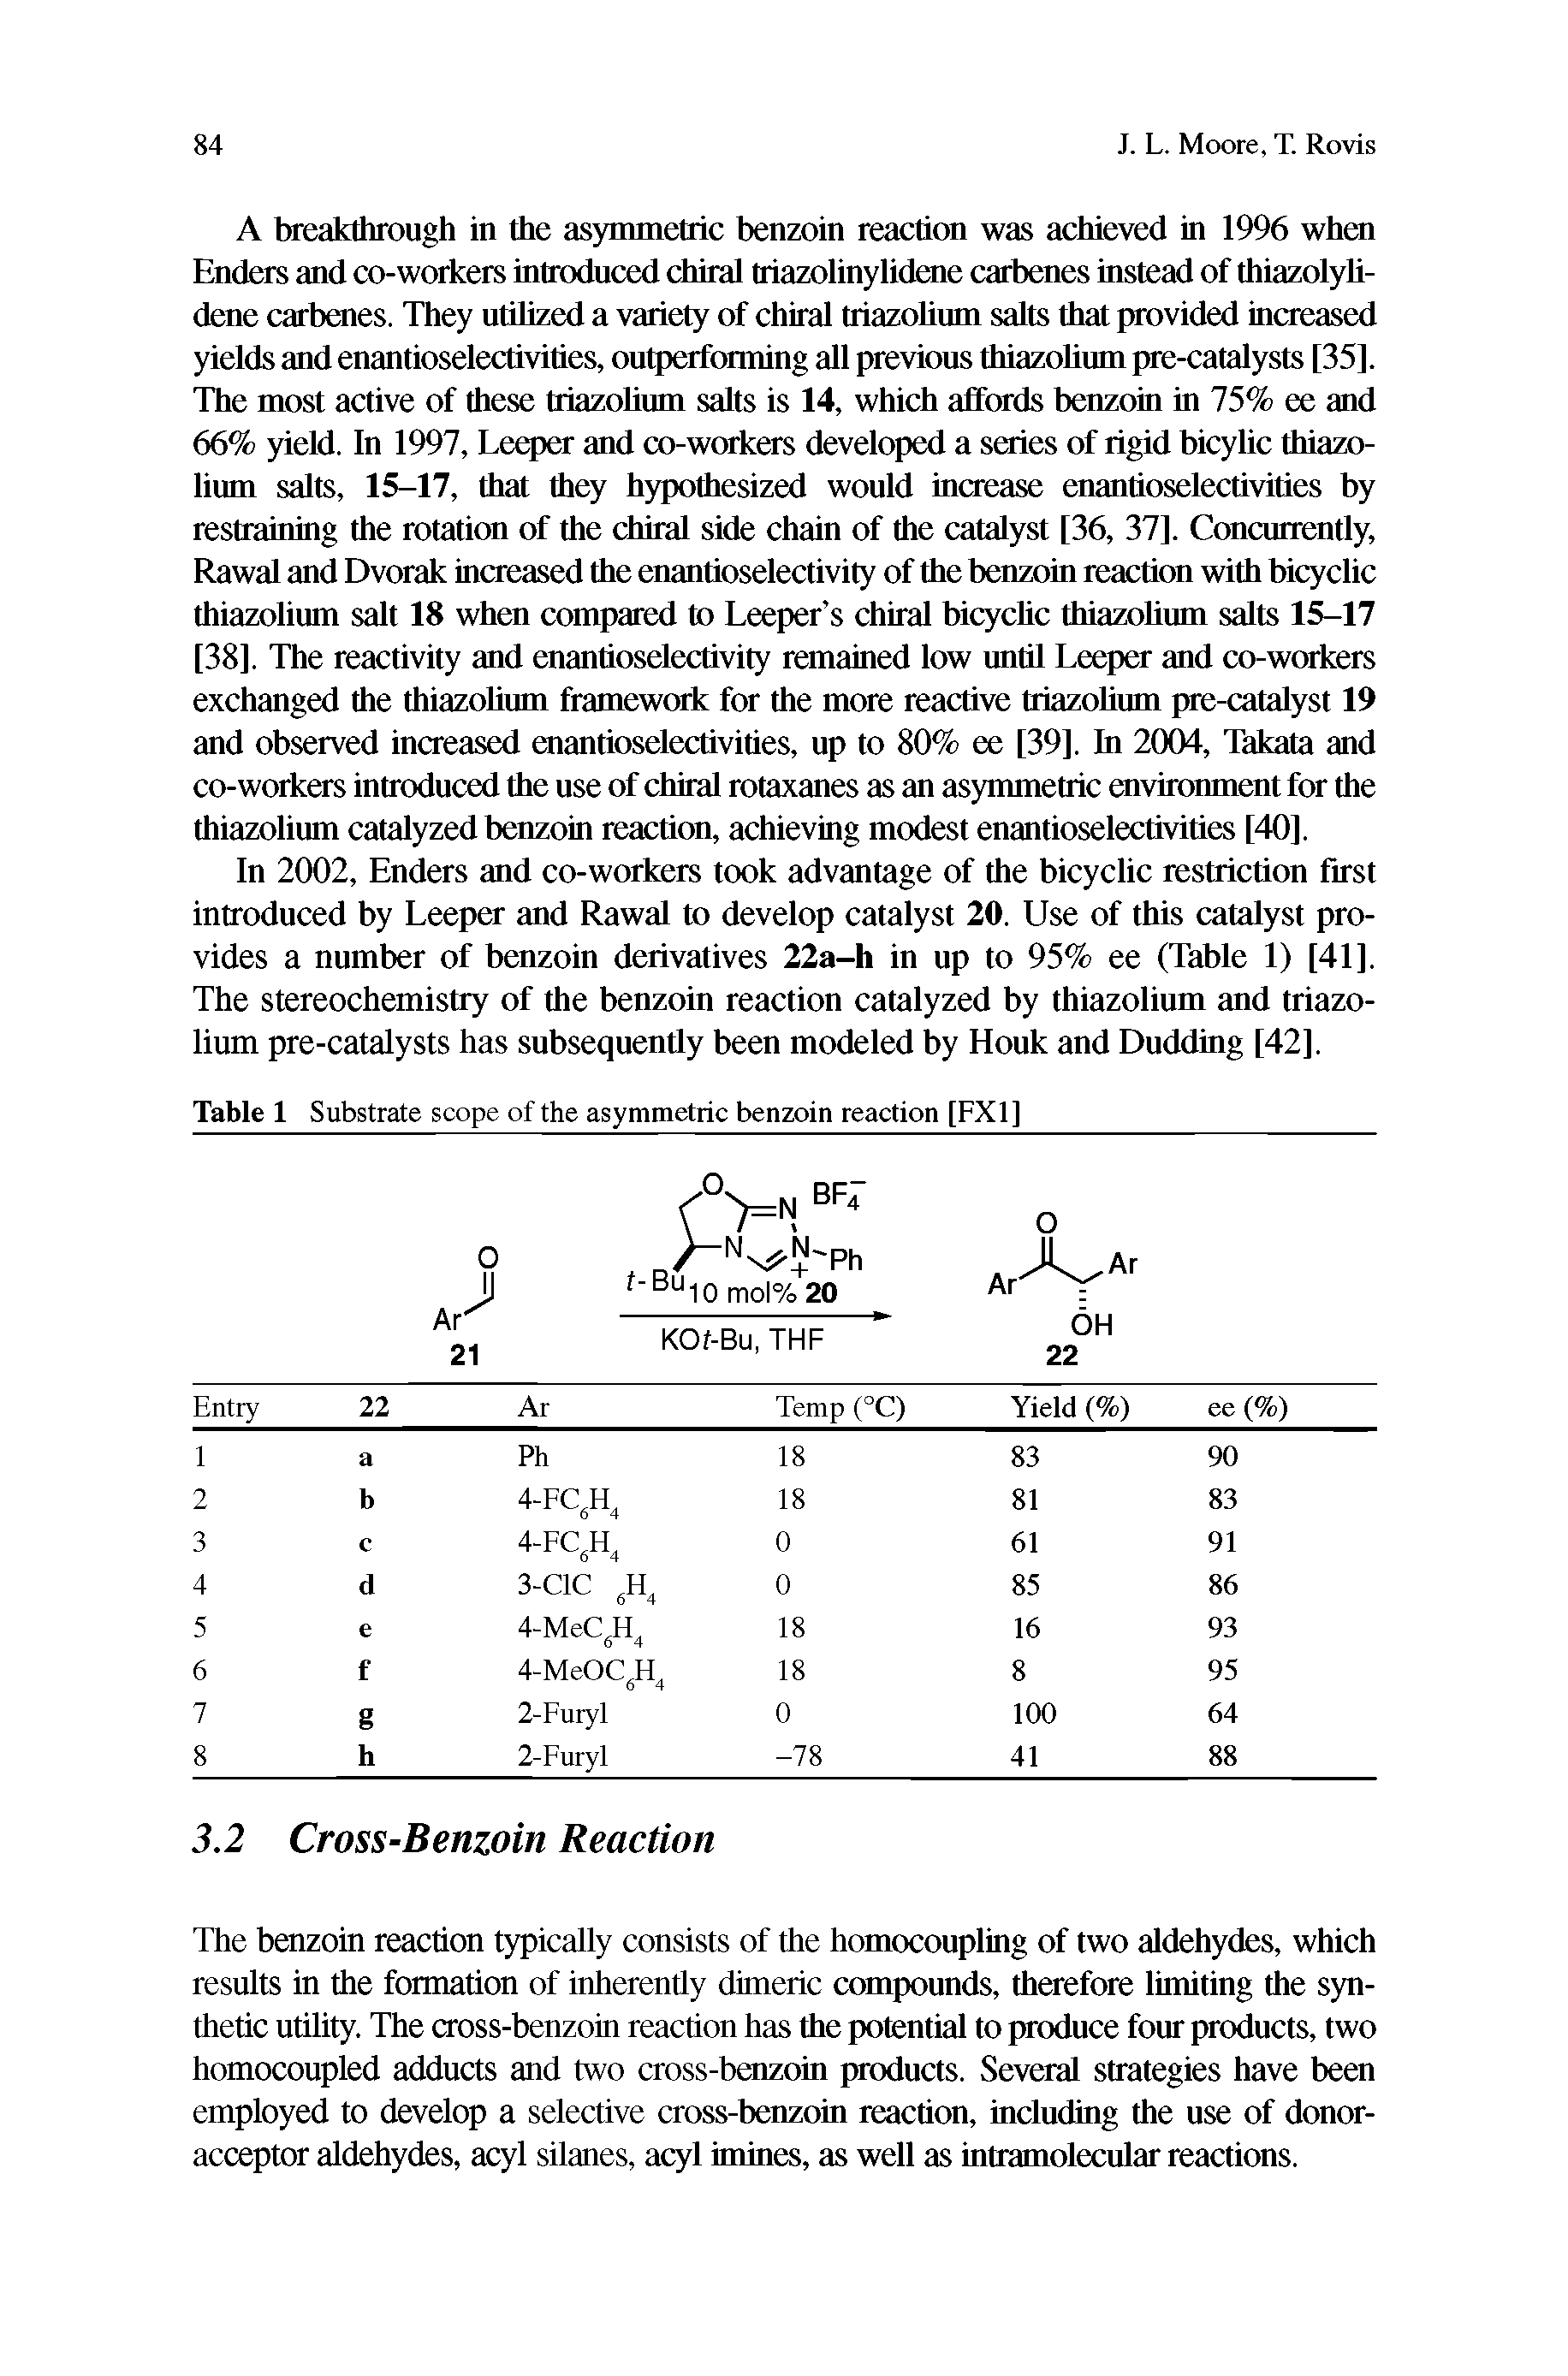 Table 1 Substrate scope of the asymmetric benzoin reaction [FXl]...